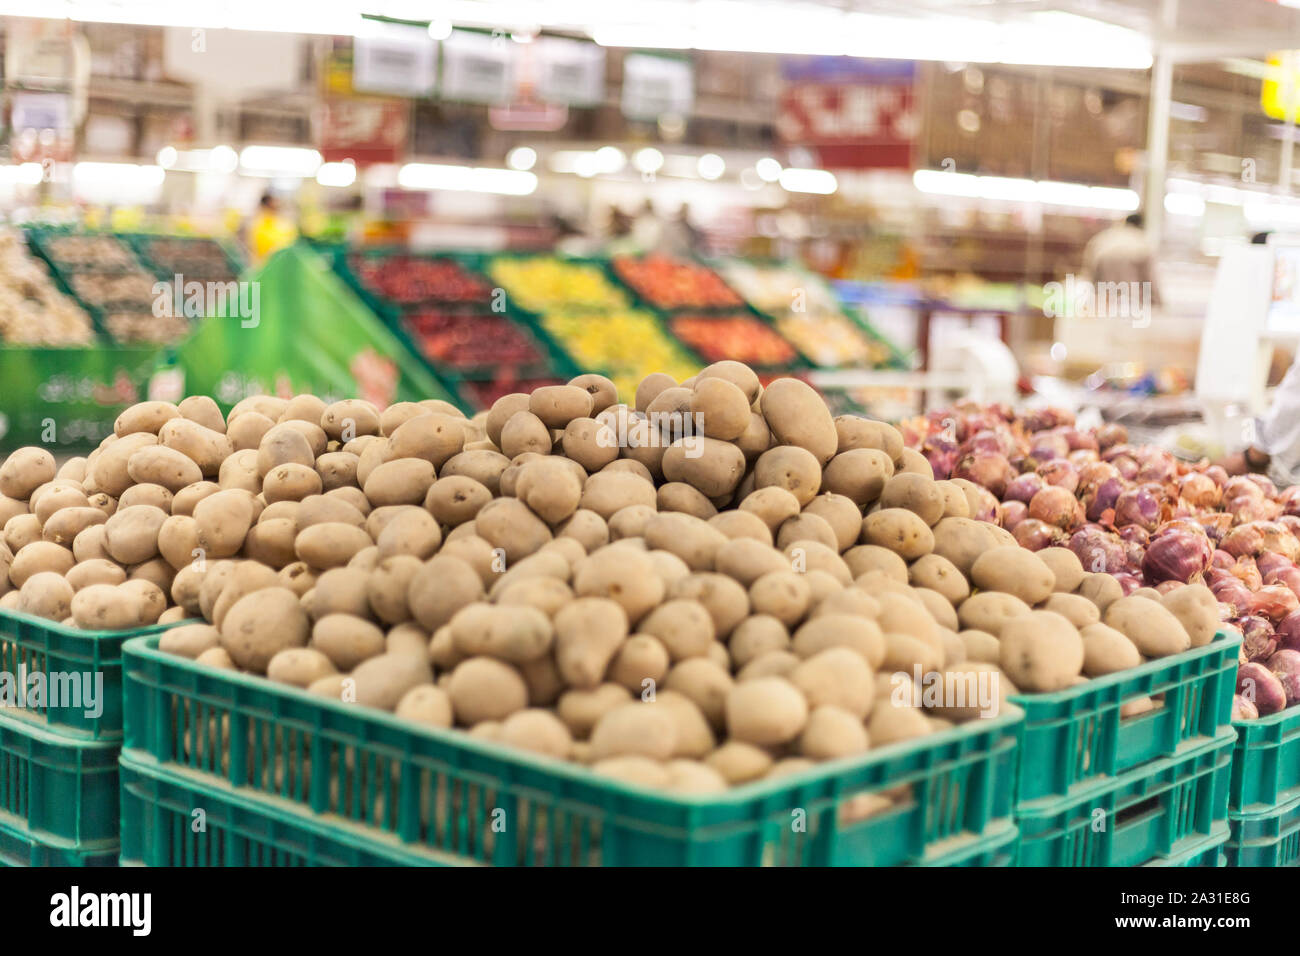 Fruits and Vegetables in hyper market Stock Photo